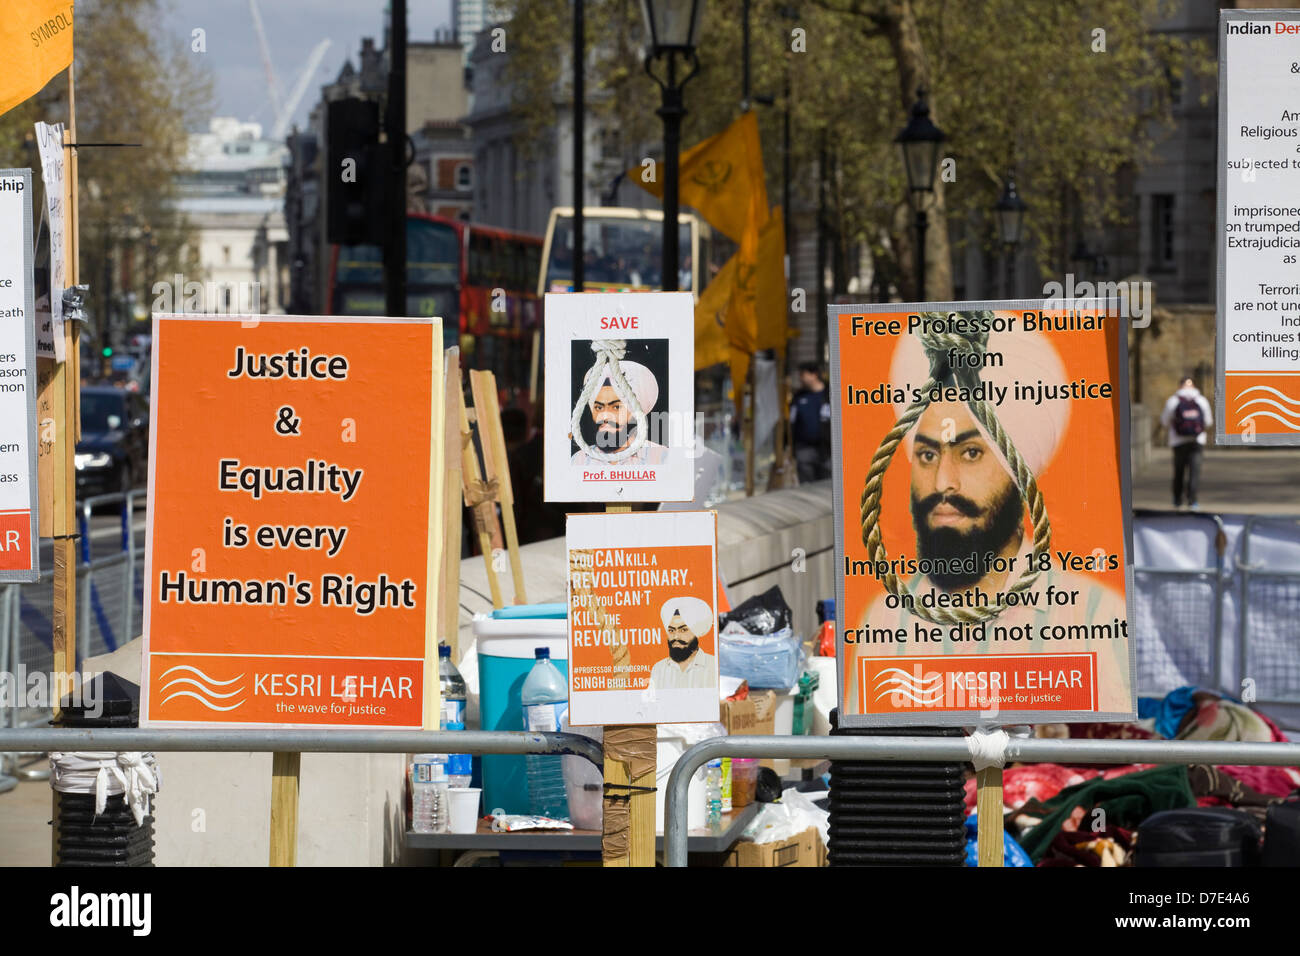 Protest outside 10 Downing street London to free Professor Bhullar from India's deadly Justice Stock Photo